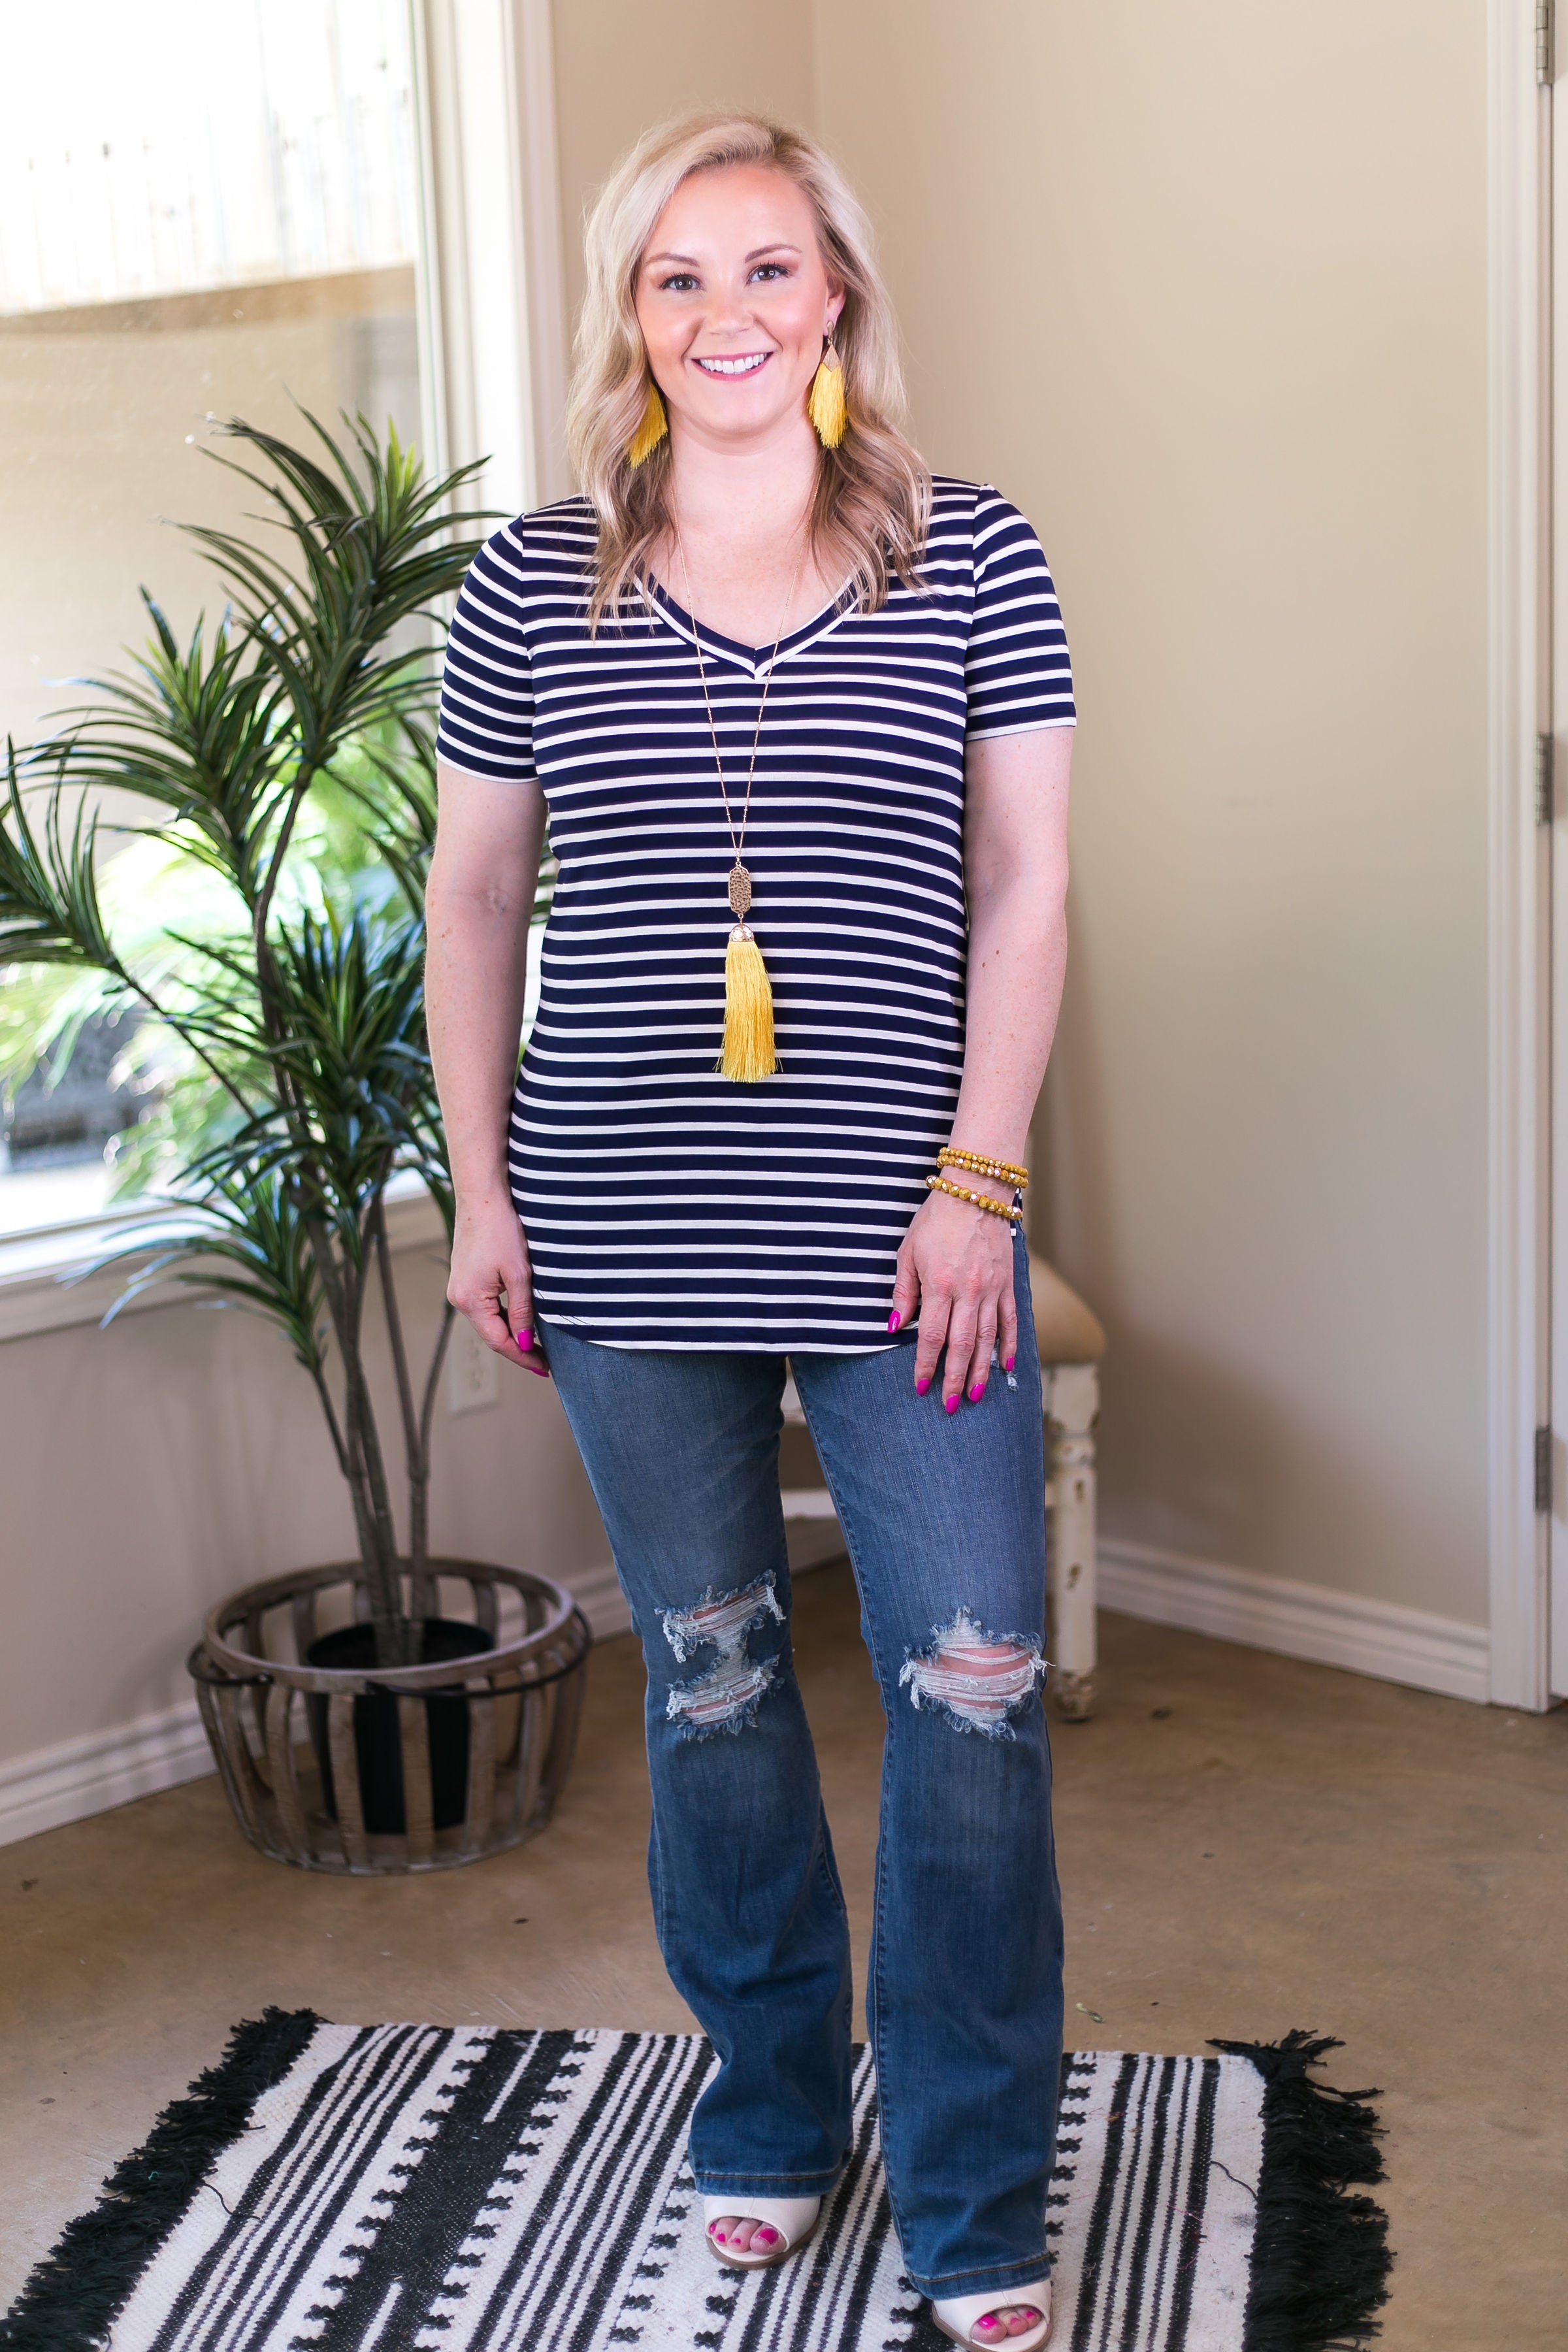 Simply The Best Striped V Neck Short Sleeve Tee Shirt in Navy Blue - Giddy Up Glamour Boutique